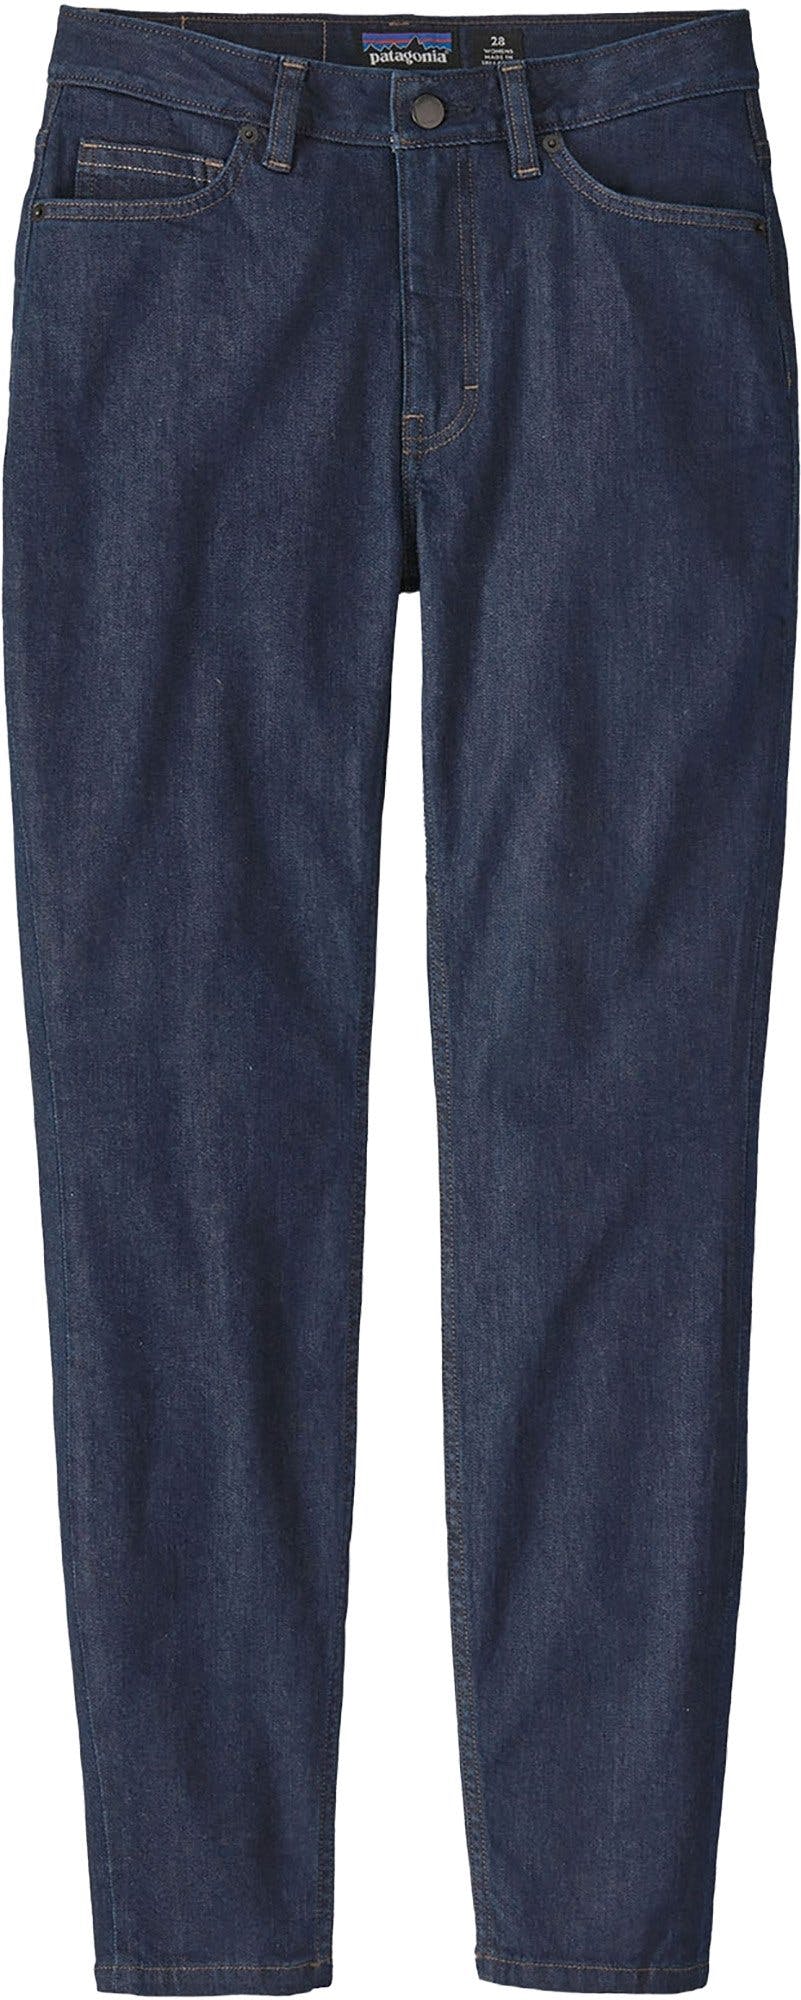 Product image for Slim Jean - Women's